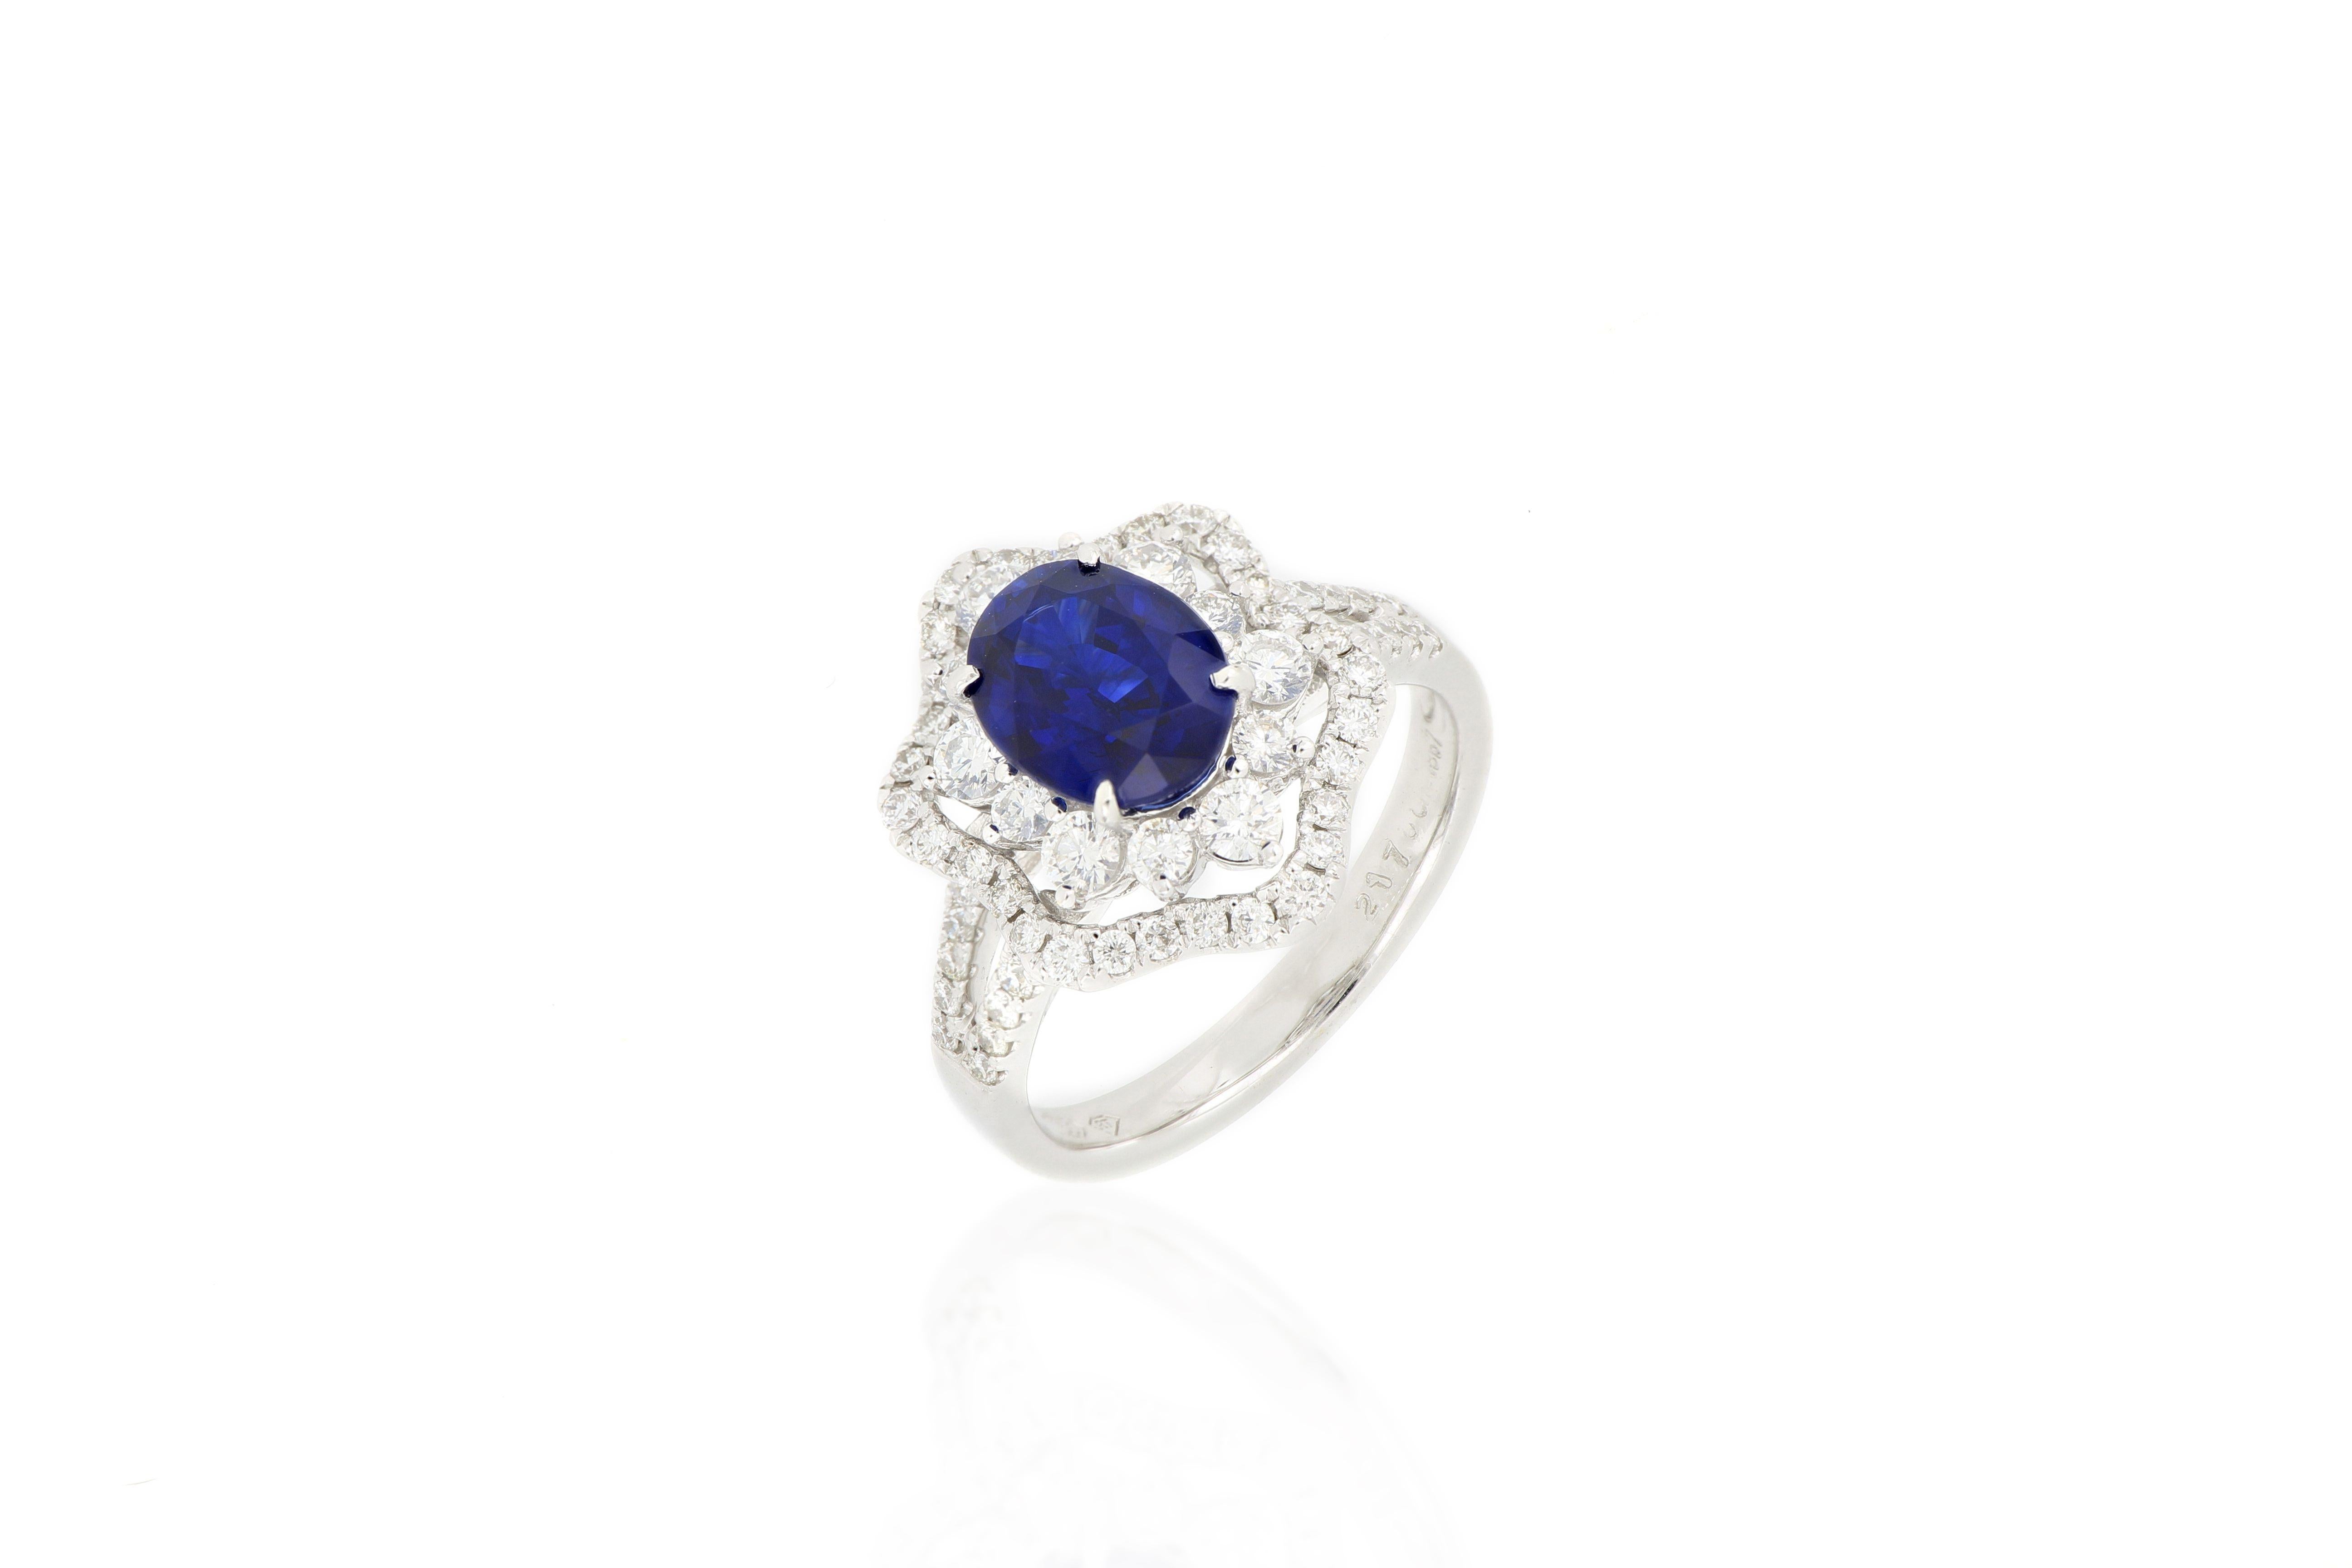 A stunning and glamorous ring, set with an oval vivid royal blue sapphire weighing 2.17cts, decorated with brilliant-cut diamonds extending to shoulders totaling 1.00cts, mounted in 18 karat white gold.
Accompanied by report from GRS. (Report Number